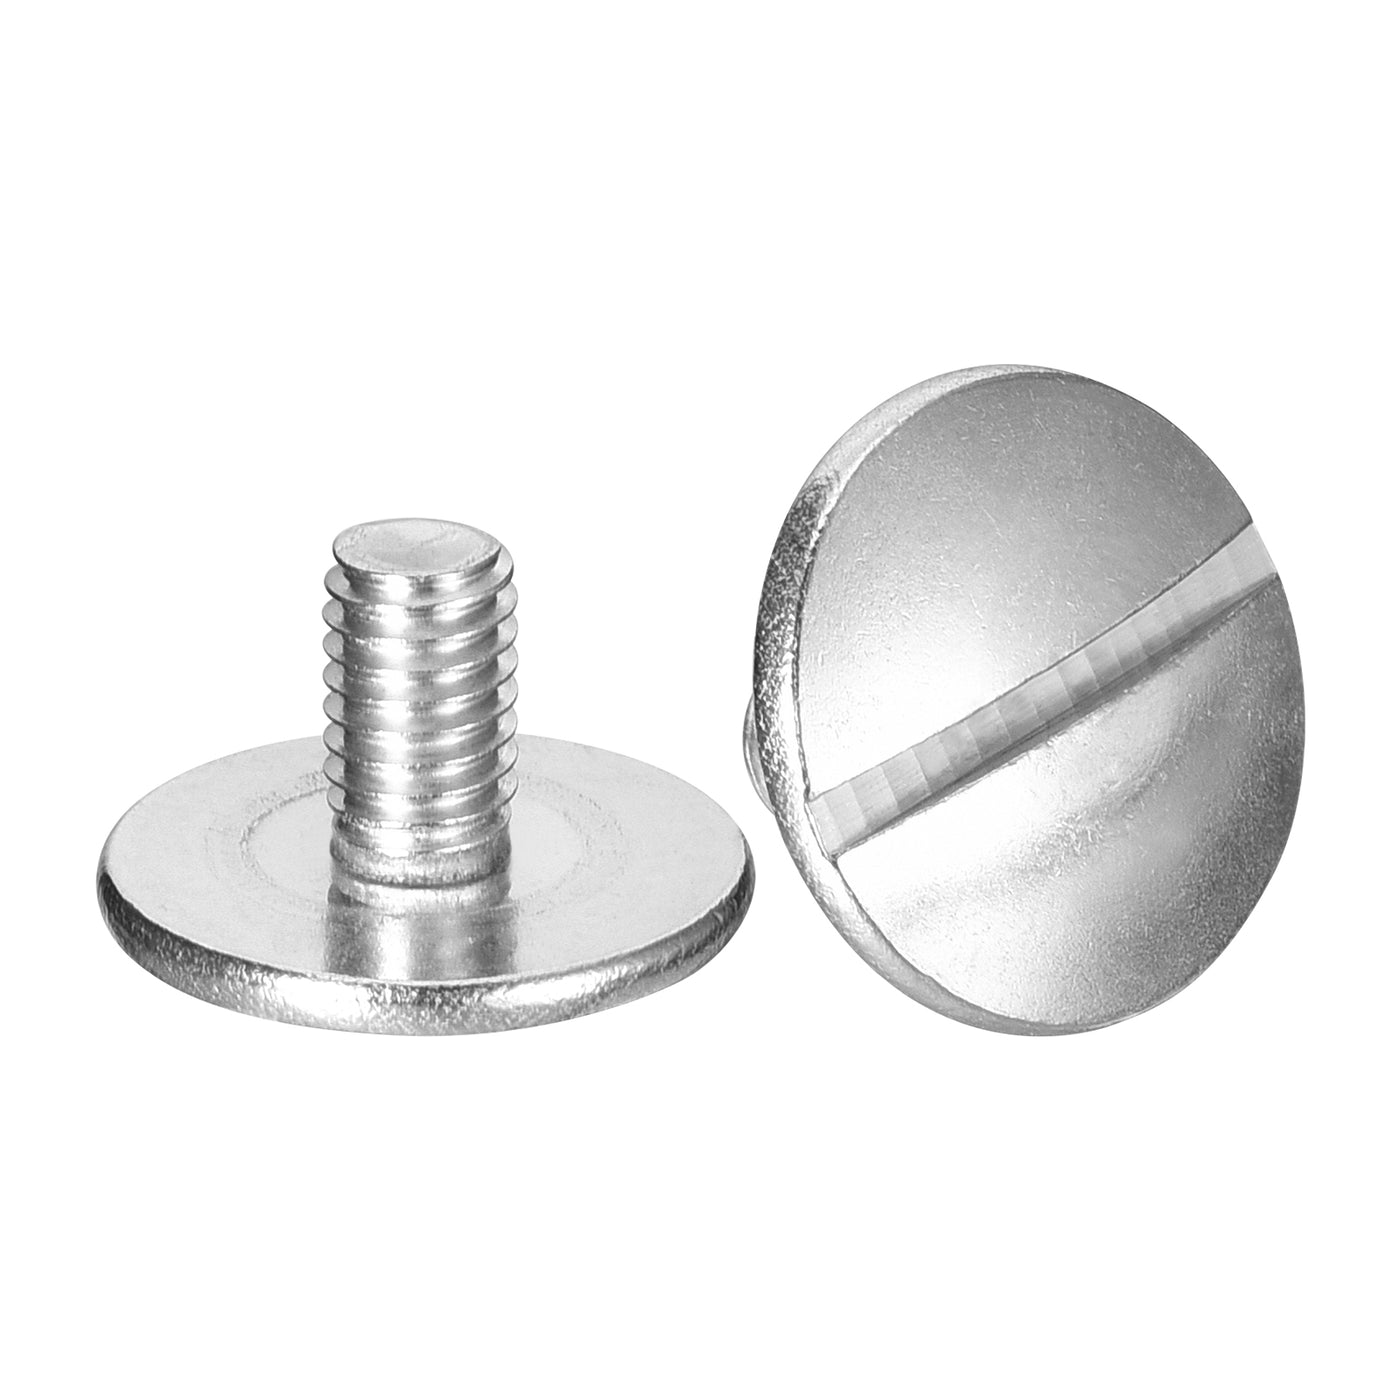 uxcell Uxcell M6x10mm Extra Large Flat Head Slotted Screws, 2pcs 304 Stainless Steel Bolts